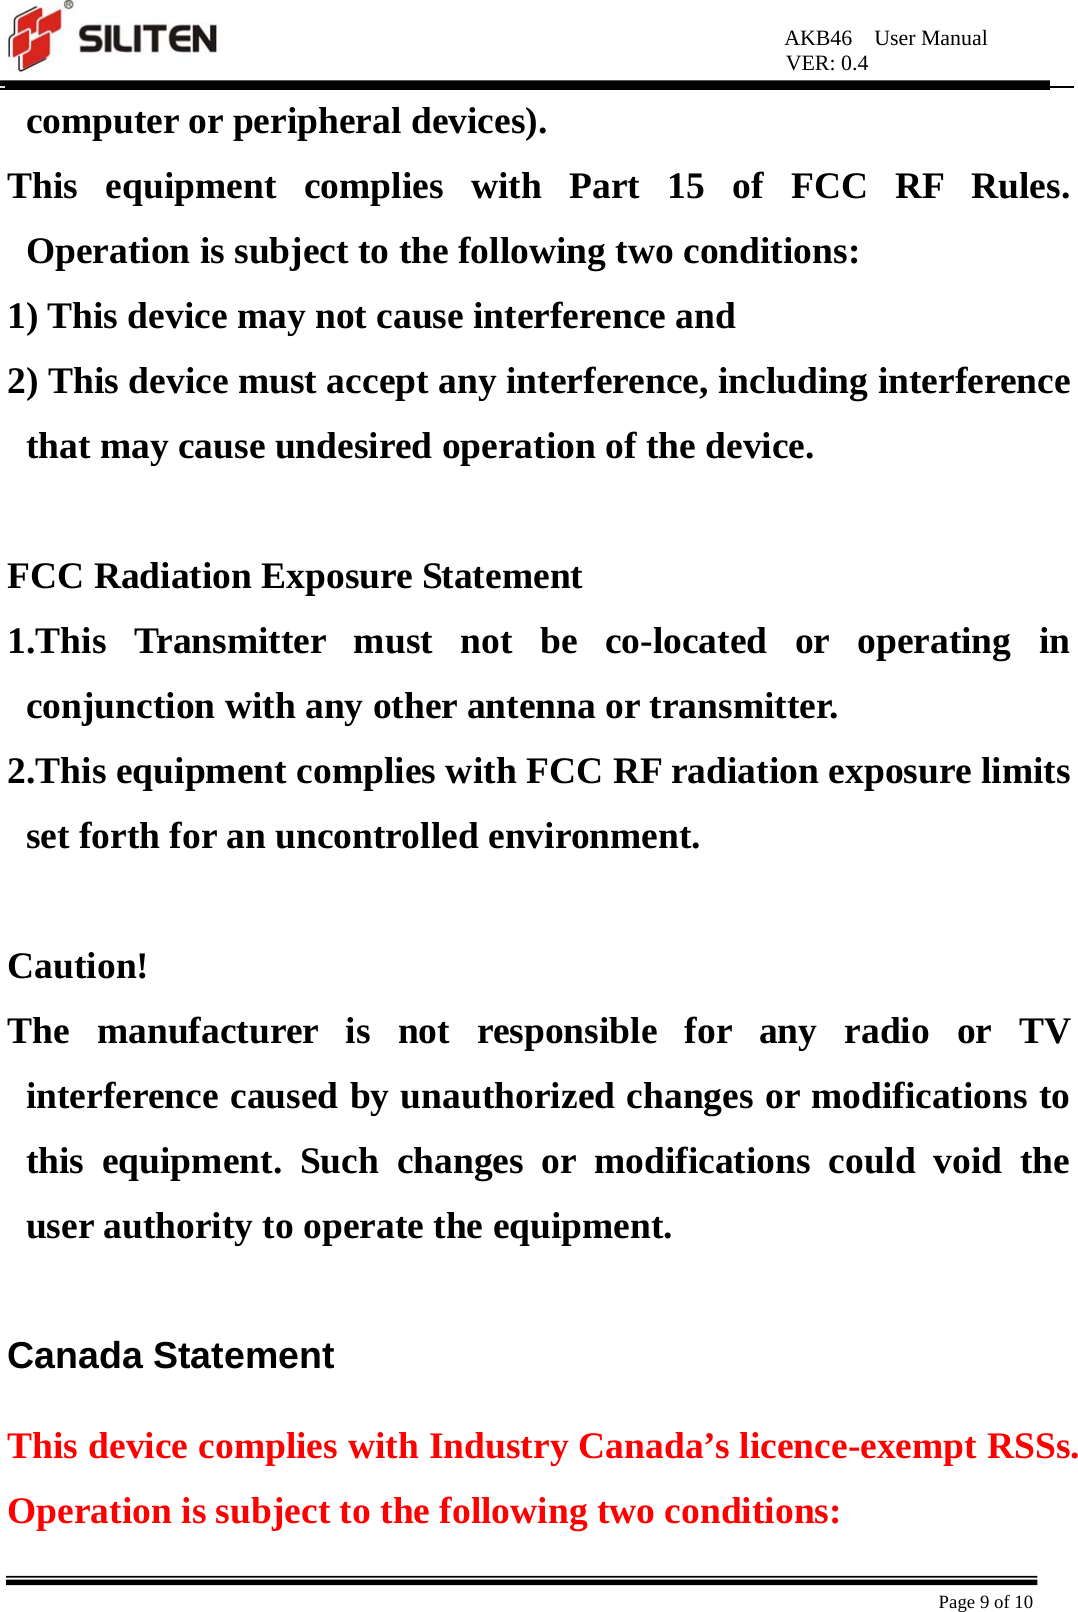 AKB46  User Manual VER: 0.4  Page 9 of 10 computer or peripheral devices).   This equipment complies with Part 15 of FCC RF Rules. Operation is subject to the following two conditions:   1) This device may not cause interference and   2) This device must accept any interference, including interference that may cause undesired operation of the device.    FCC Radiation Exposure Statement   1.This Transmitter must not be co-located or operating in conjunction with any other antenna or transmitter.   2.This equipment complies with FCC RF radiation exposure limits set forth for an uncontrolled environment.    Caution!  The manufacturer is not responsible for any radio or TV interference caused by unauthorized changes or modifications to this equipment. Such changes or modifications could void the user authority to operate the equipment.  Canada Statement   This device complies with Industry Canada’s licence-exempt RSSs. Operation is subject to the following two conditions: 